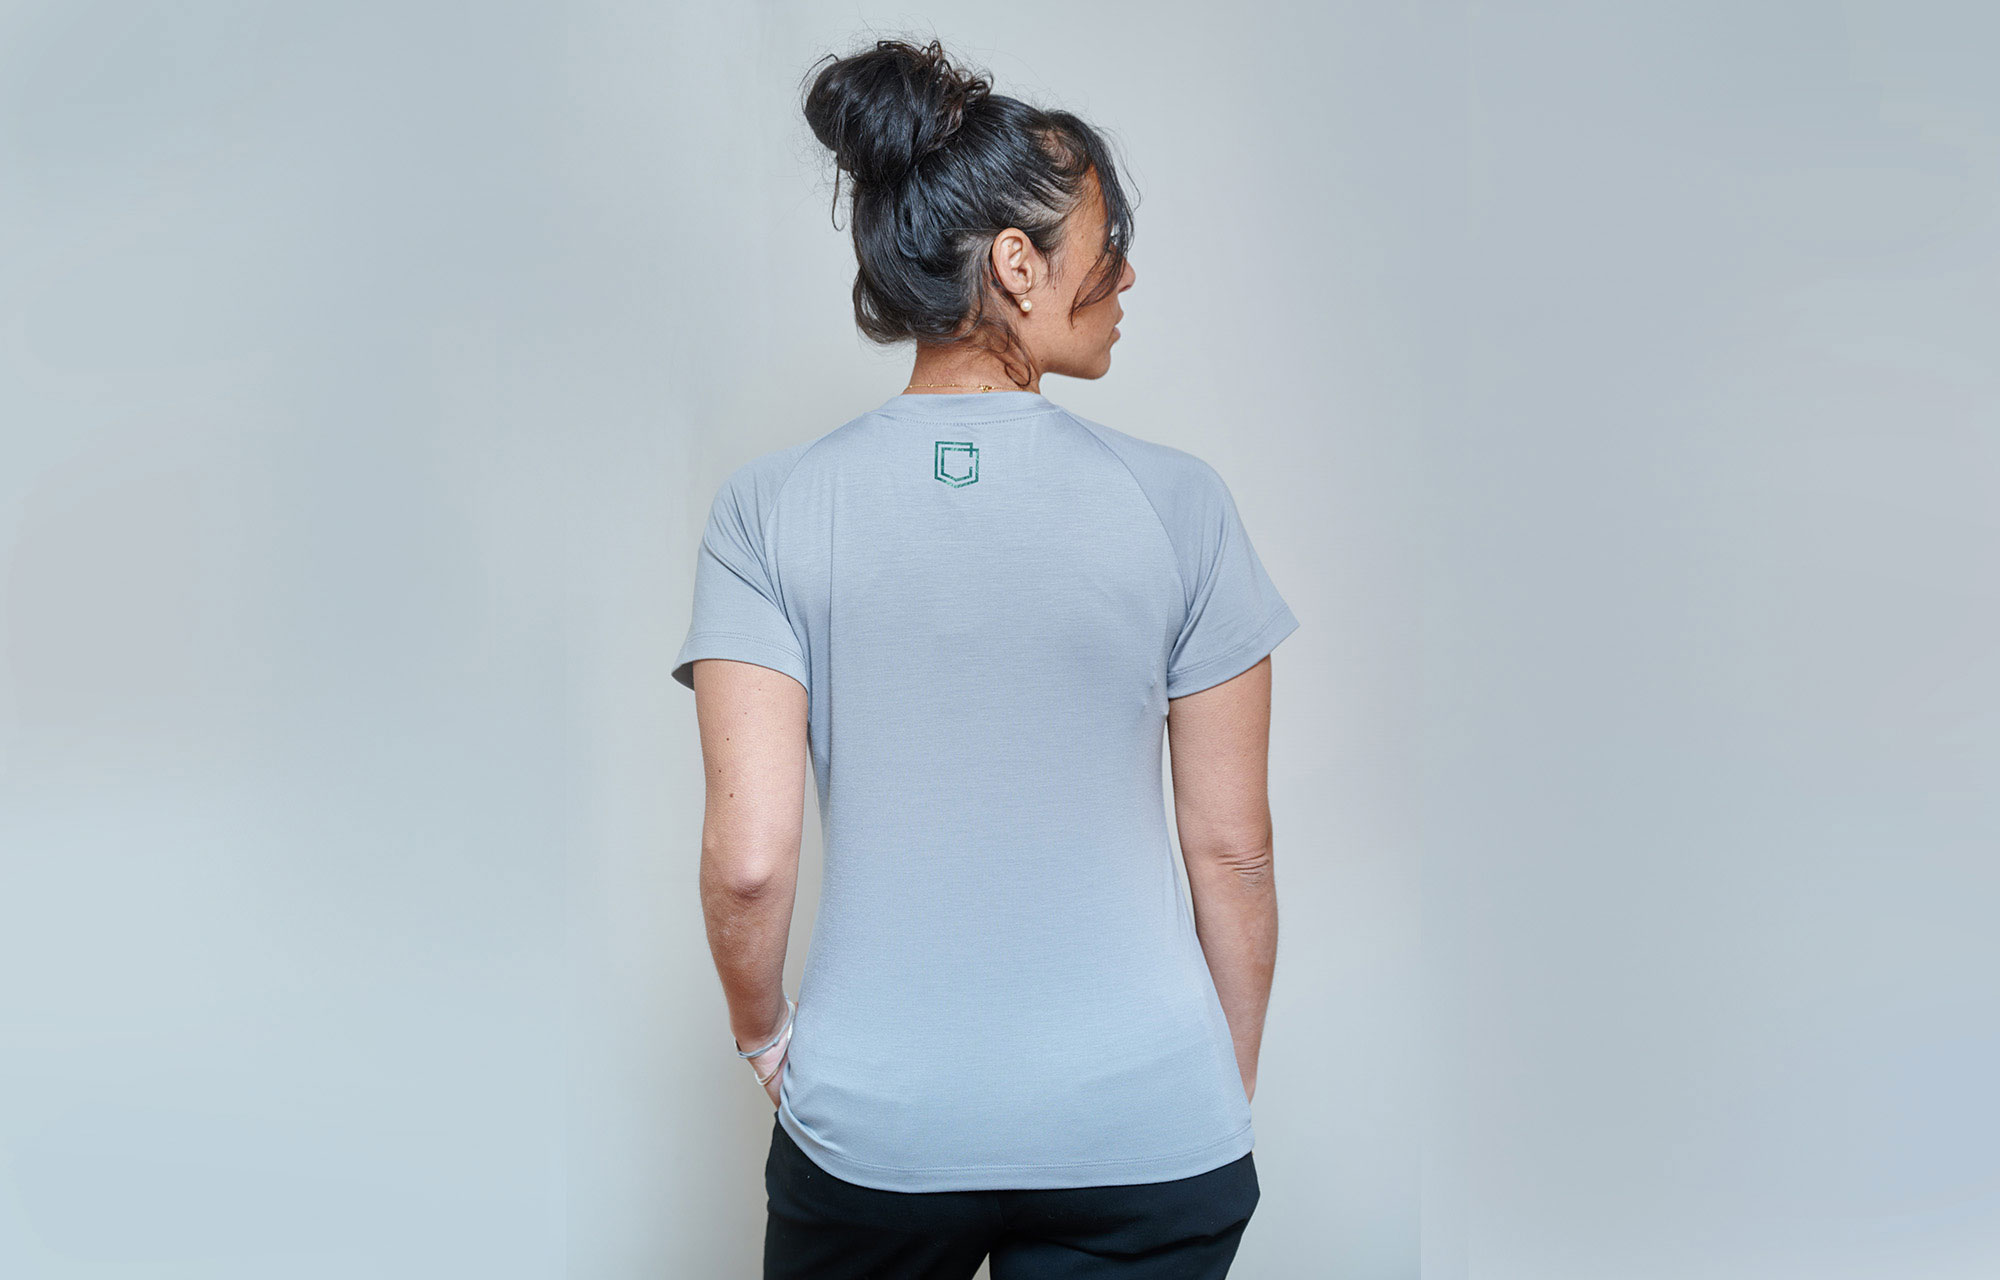 COMMENCAL WOMEN SOFTECH SHORT SLEEVE JERSEY GREY image number 0